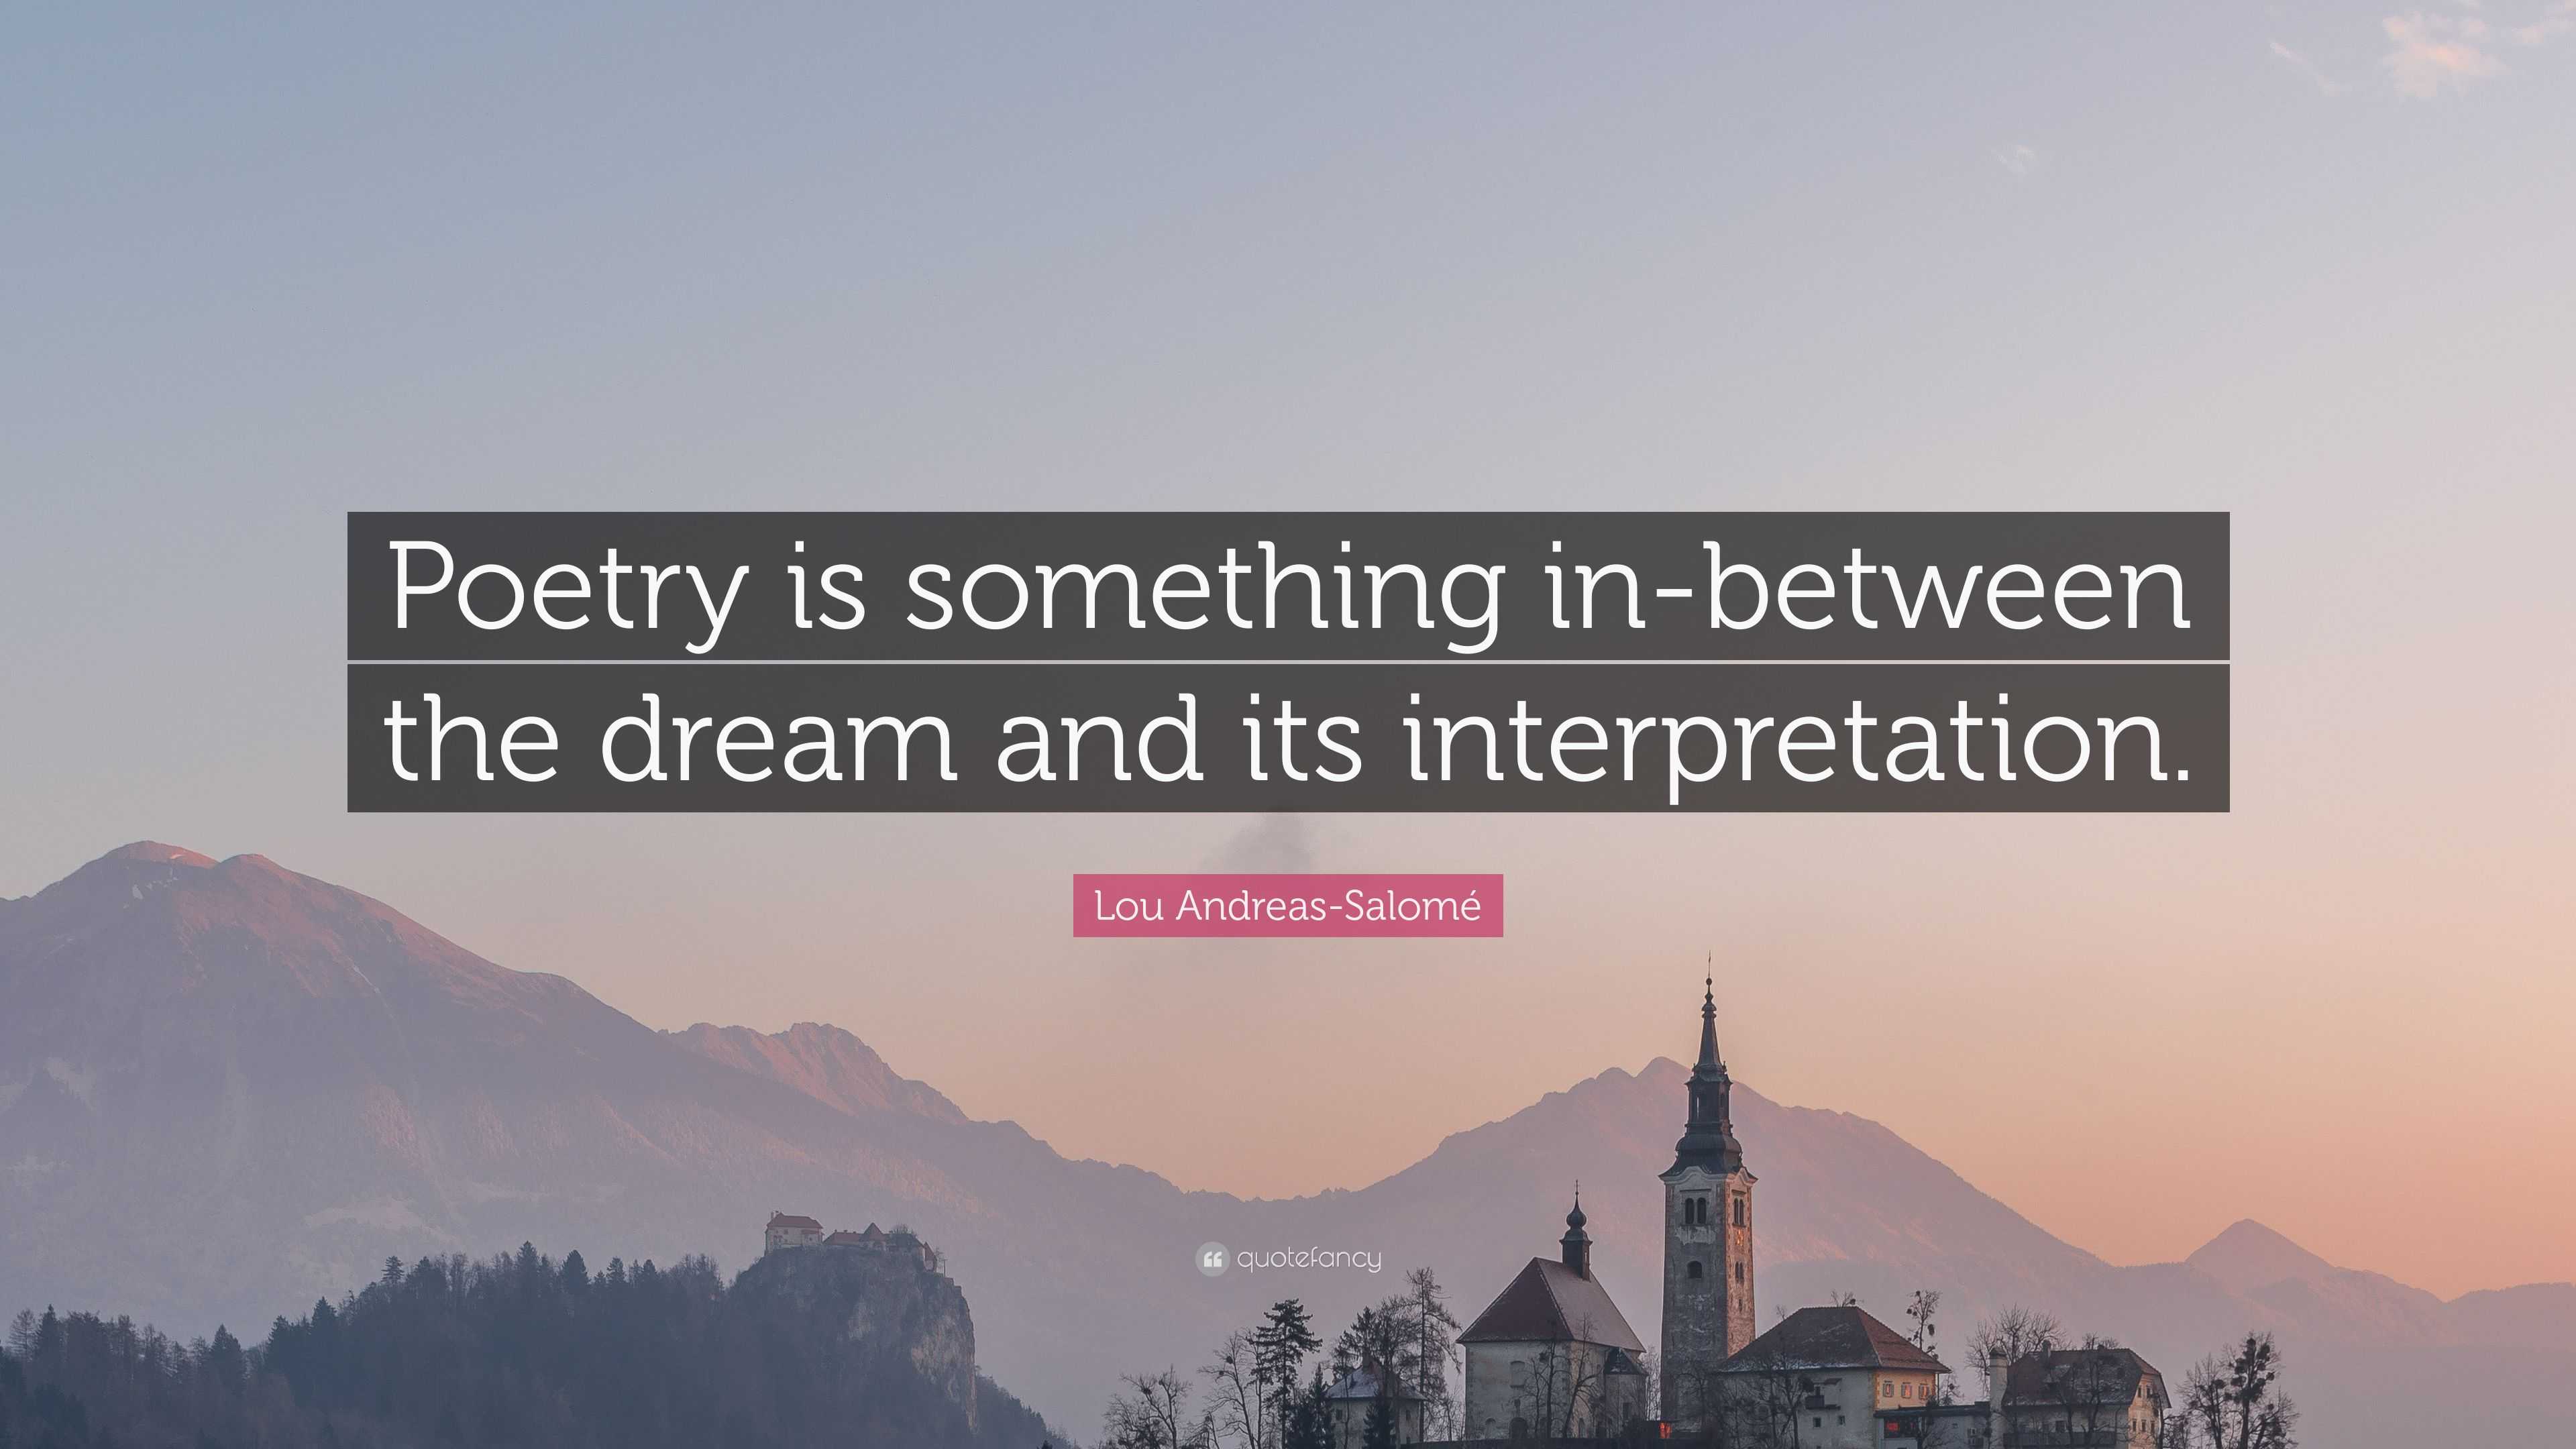 Lou Andreas-Salomé Quote: “Poetry is something in-between the dream and ...